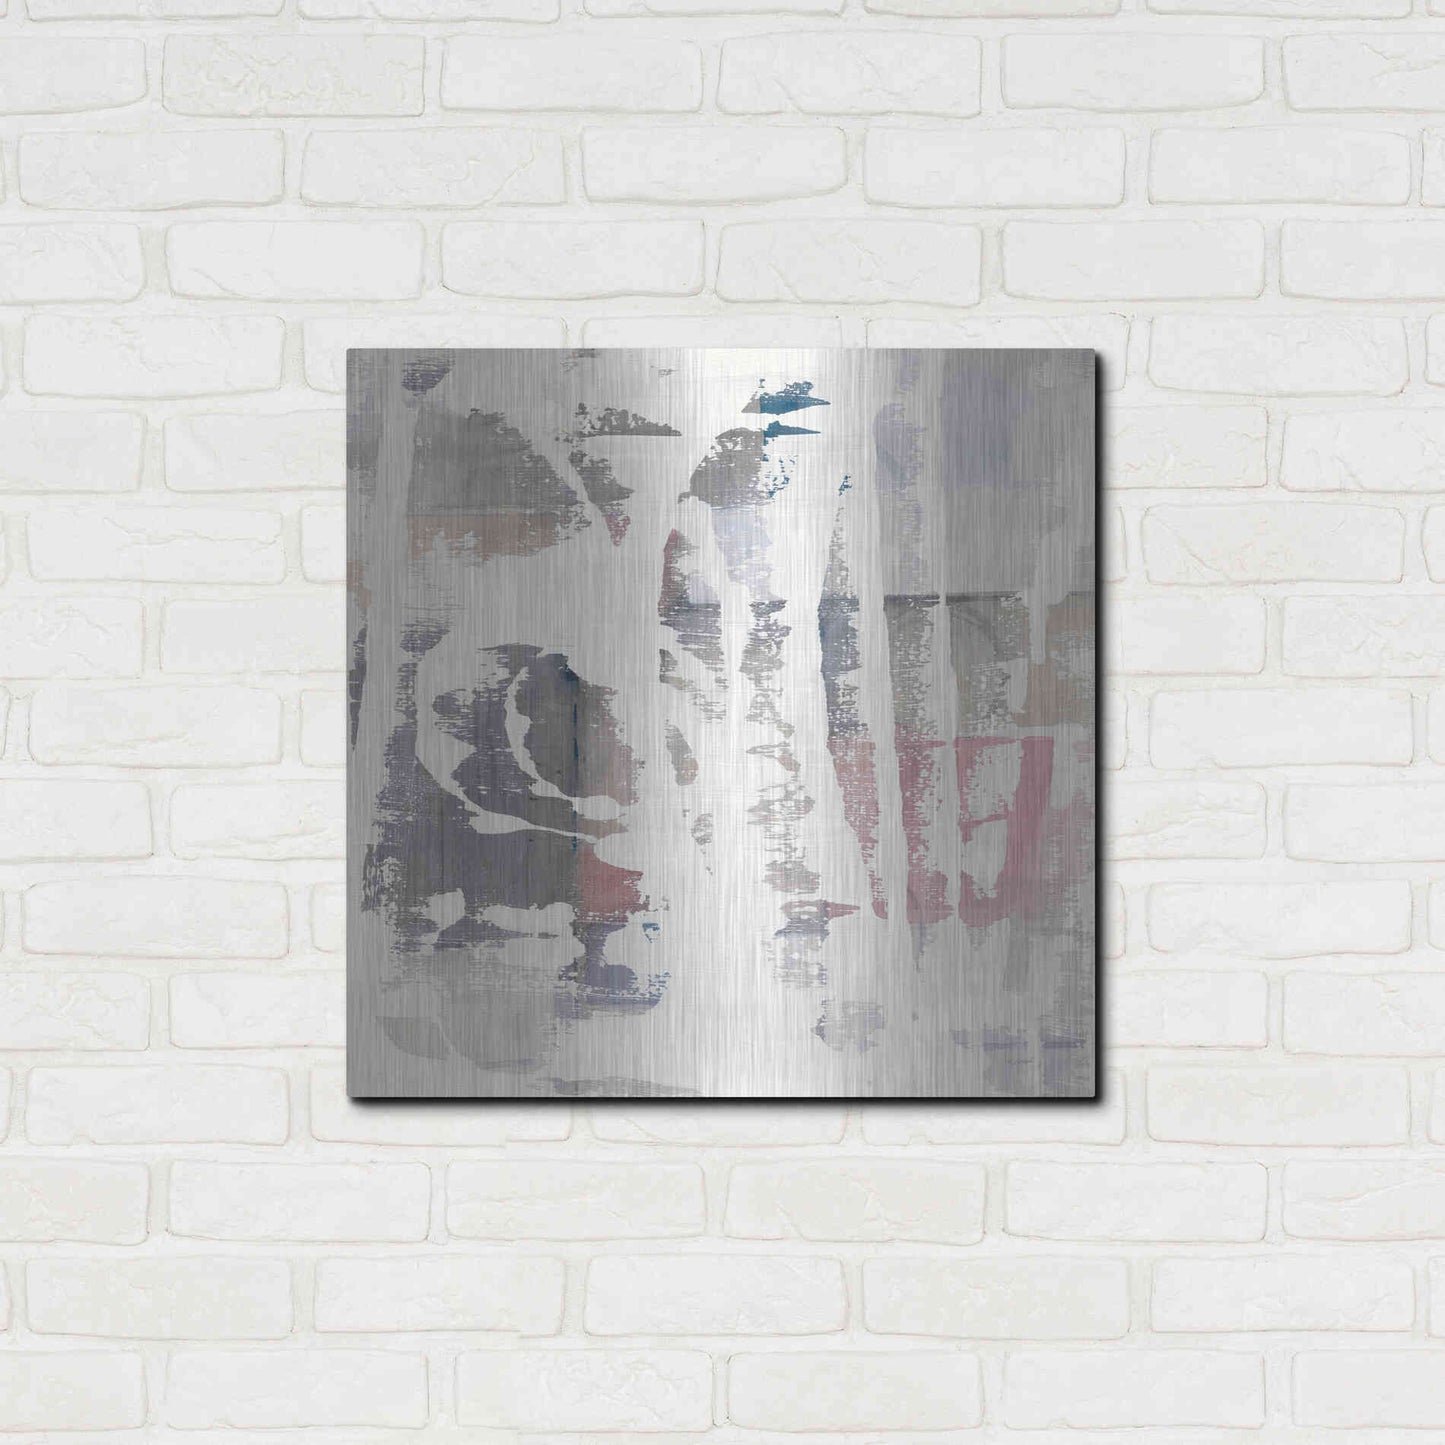 Luxe Metal Art 'White Out Crop' by Mike Schick, Metal Wall Art,24x24